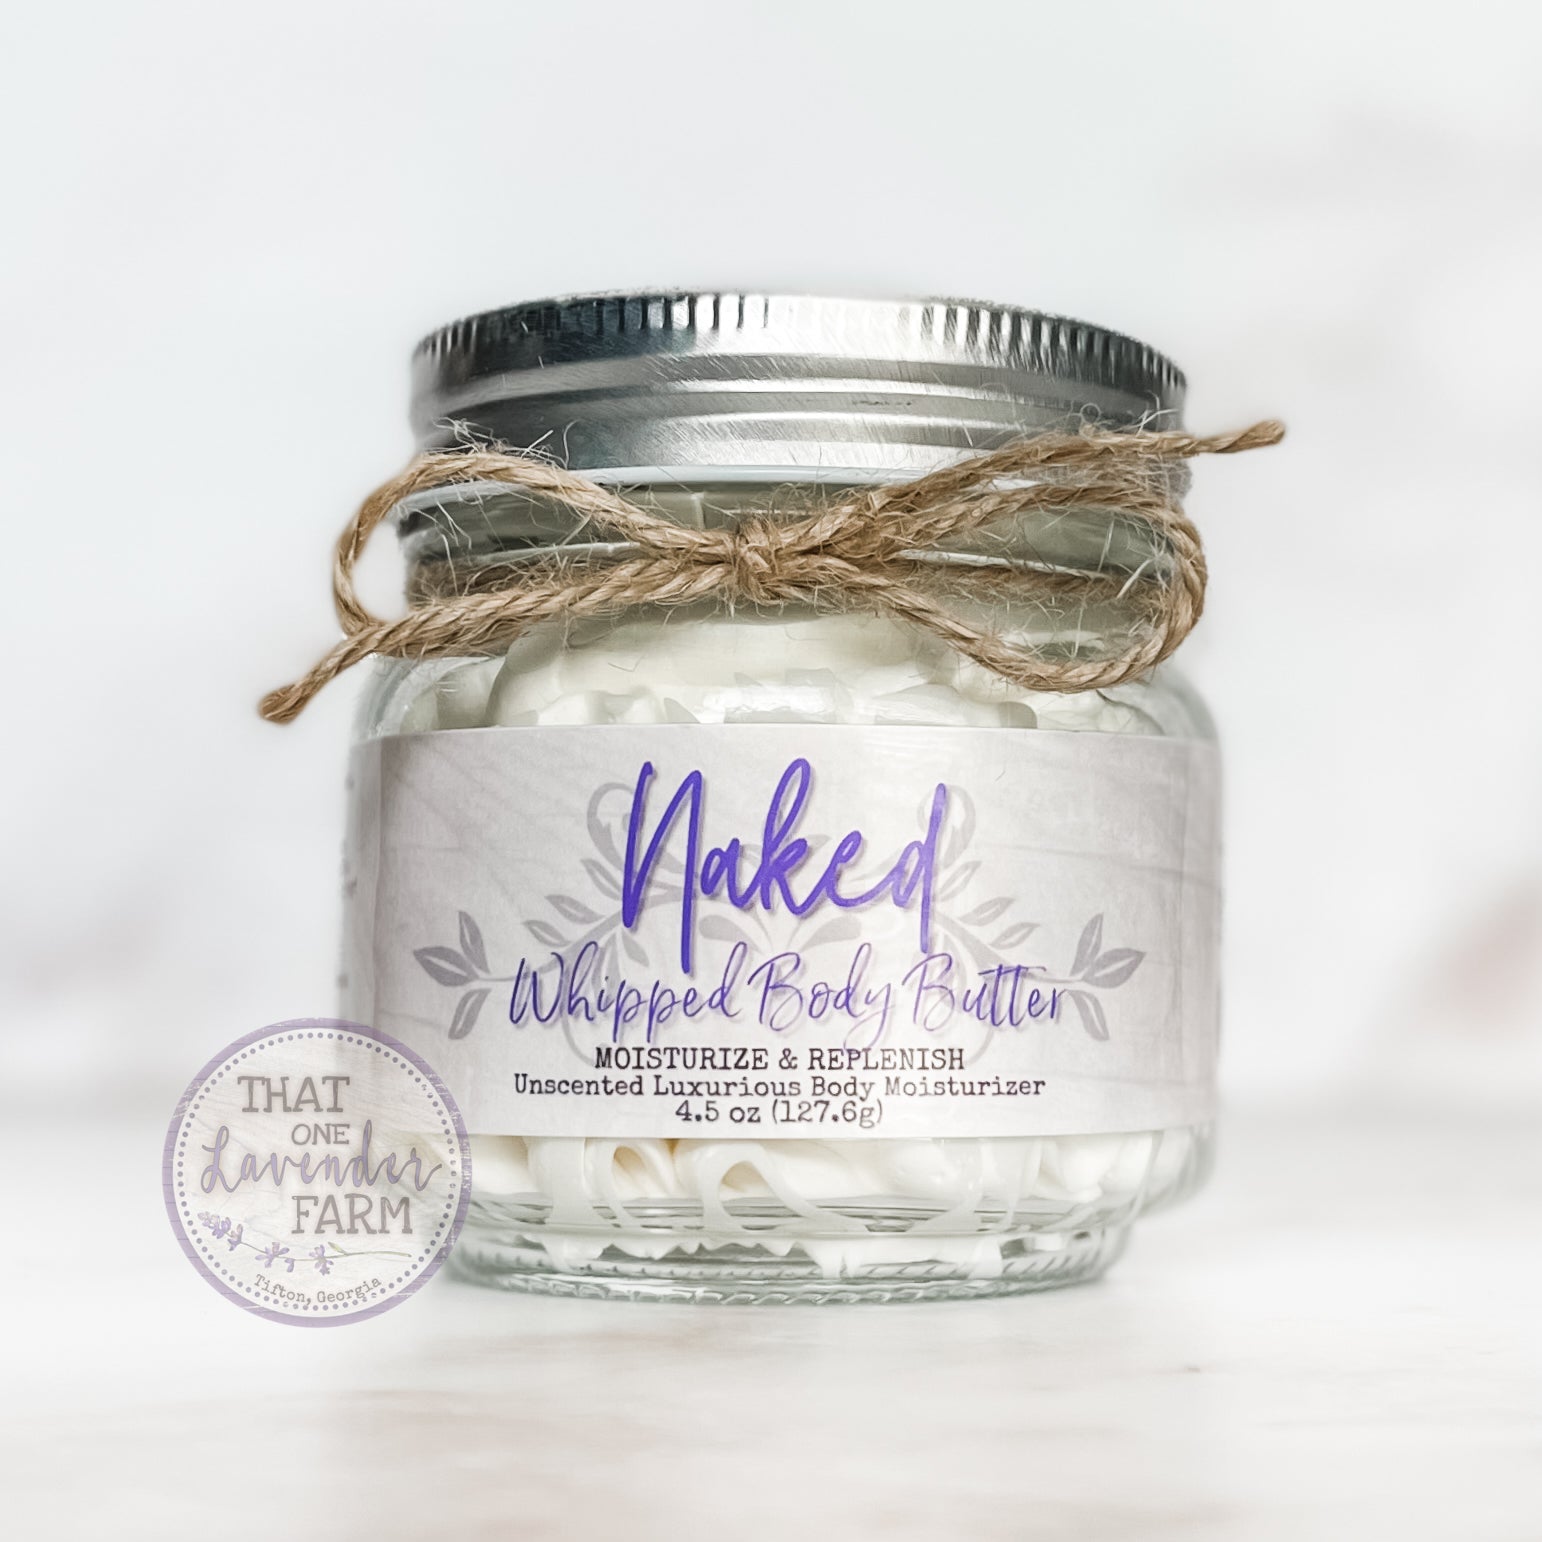 Naked White Label Whipped Body Butter (7178476519601)